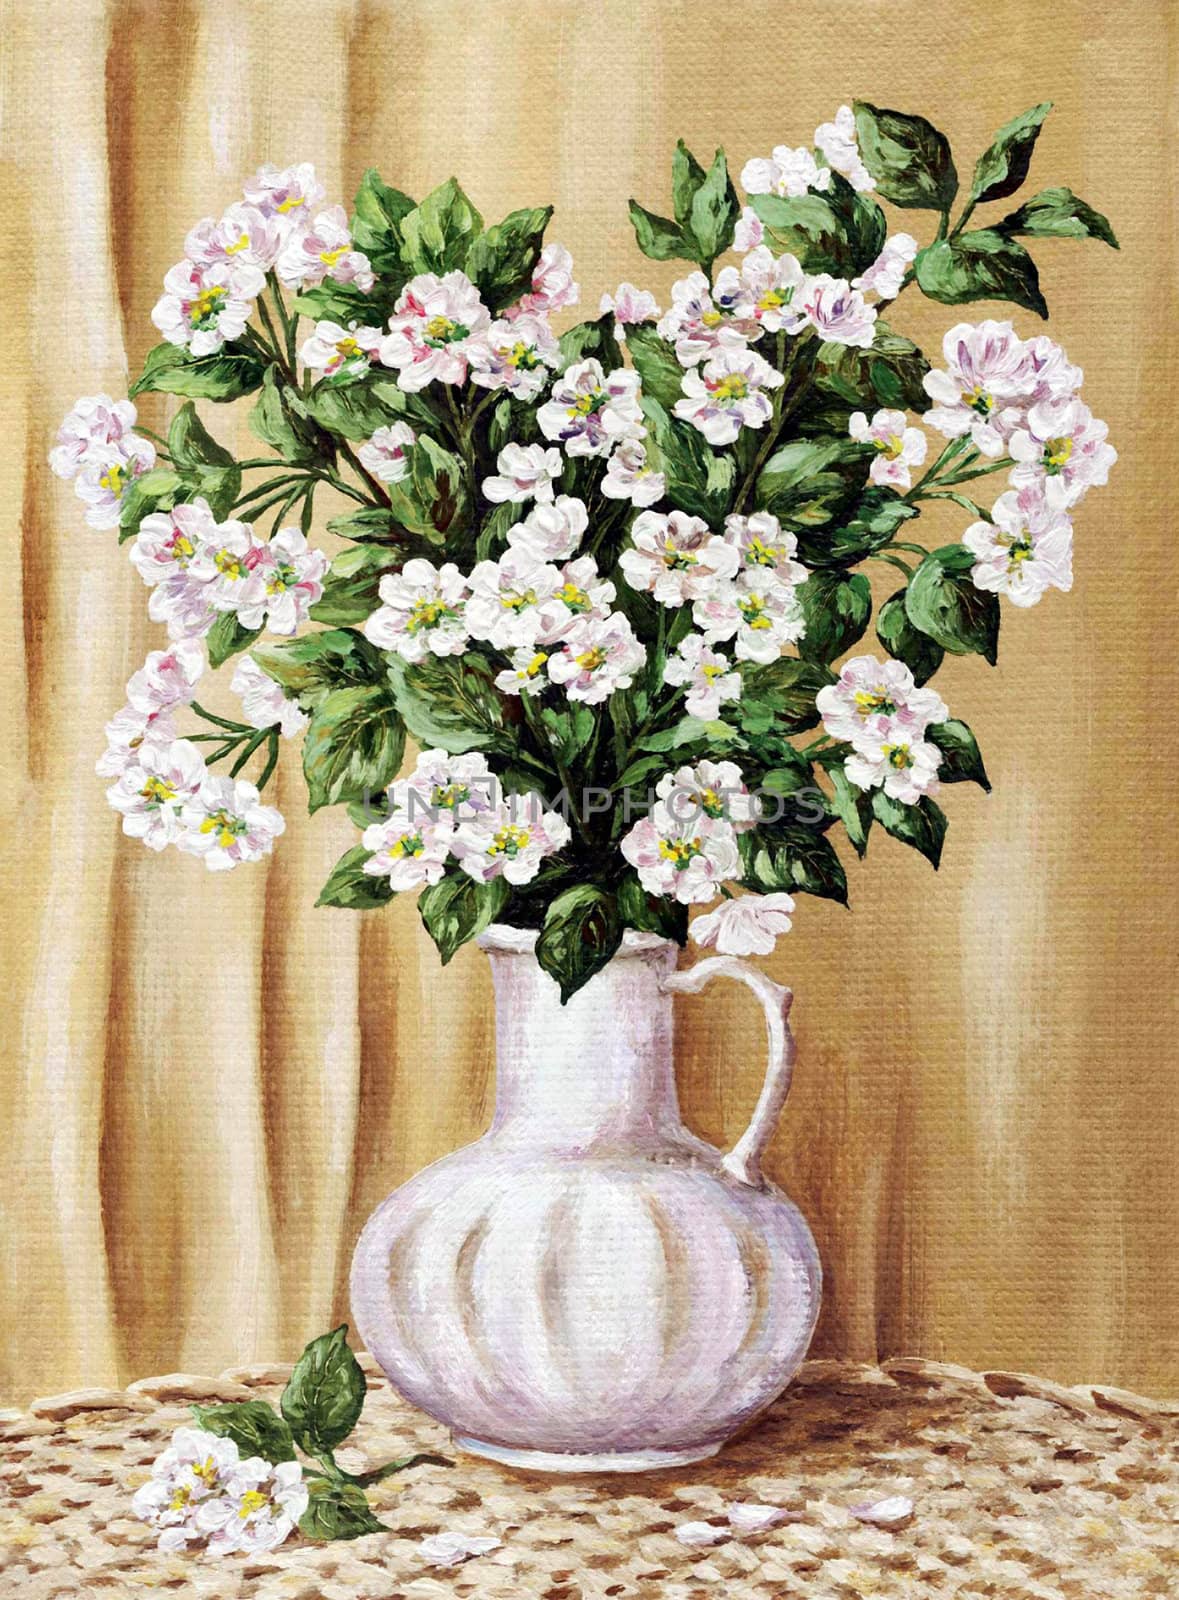 Blossoming apple-tree in a white jug by alexcoolok